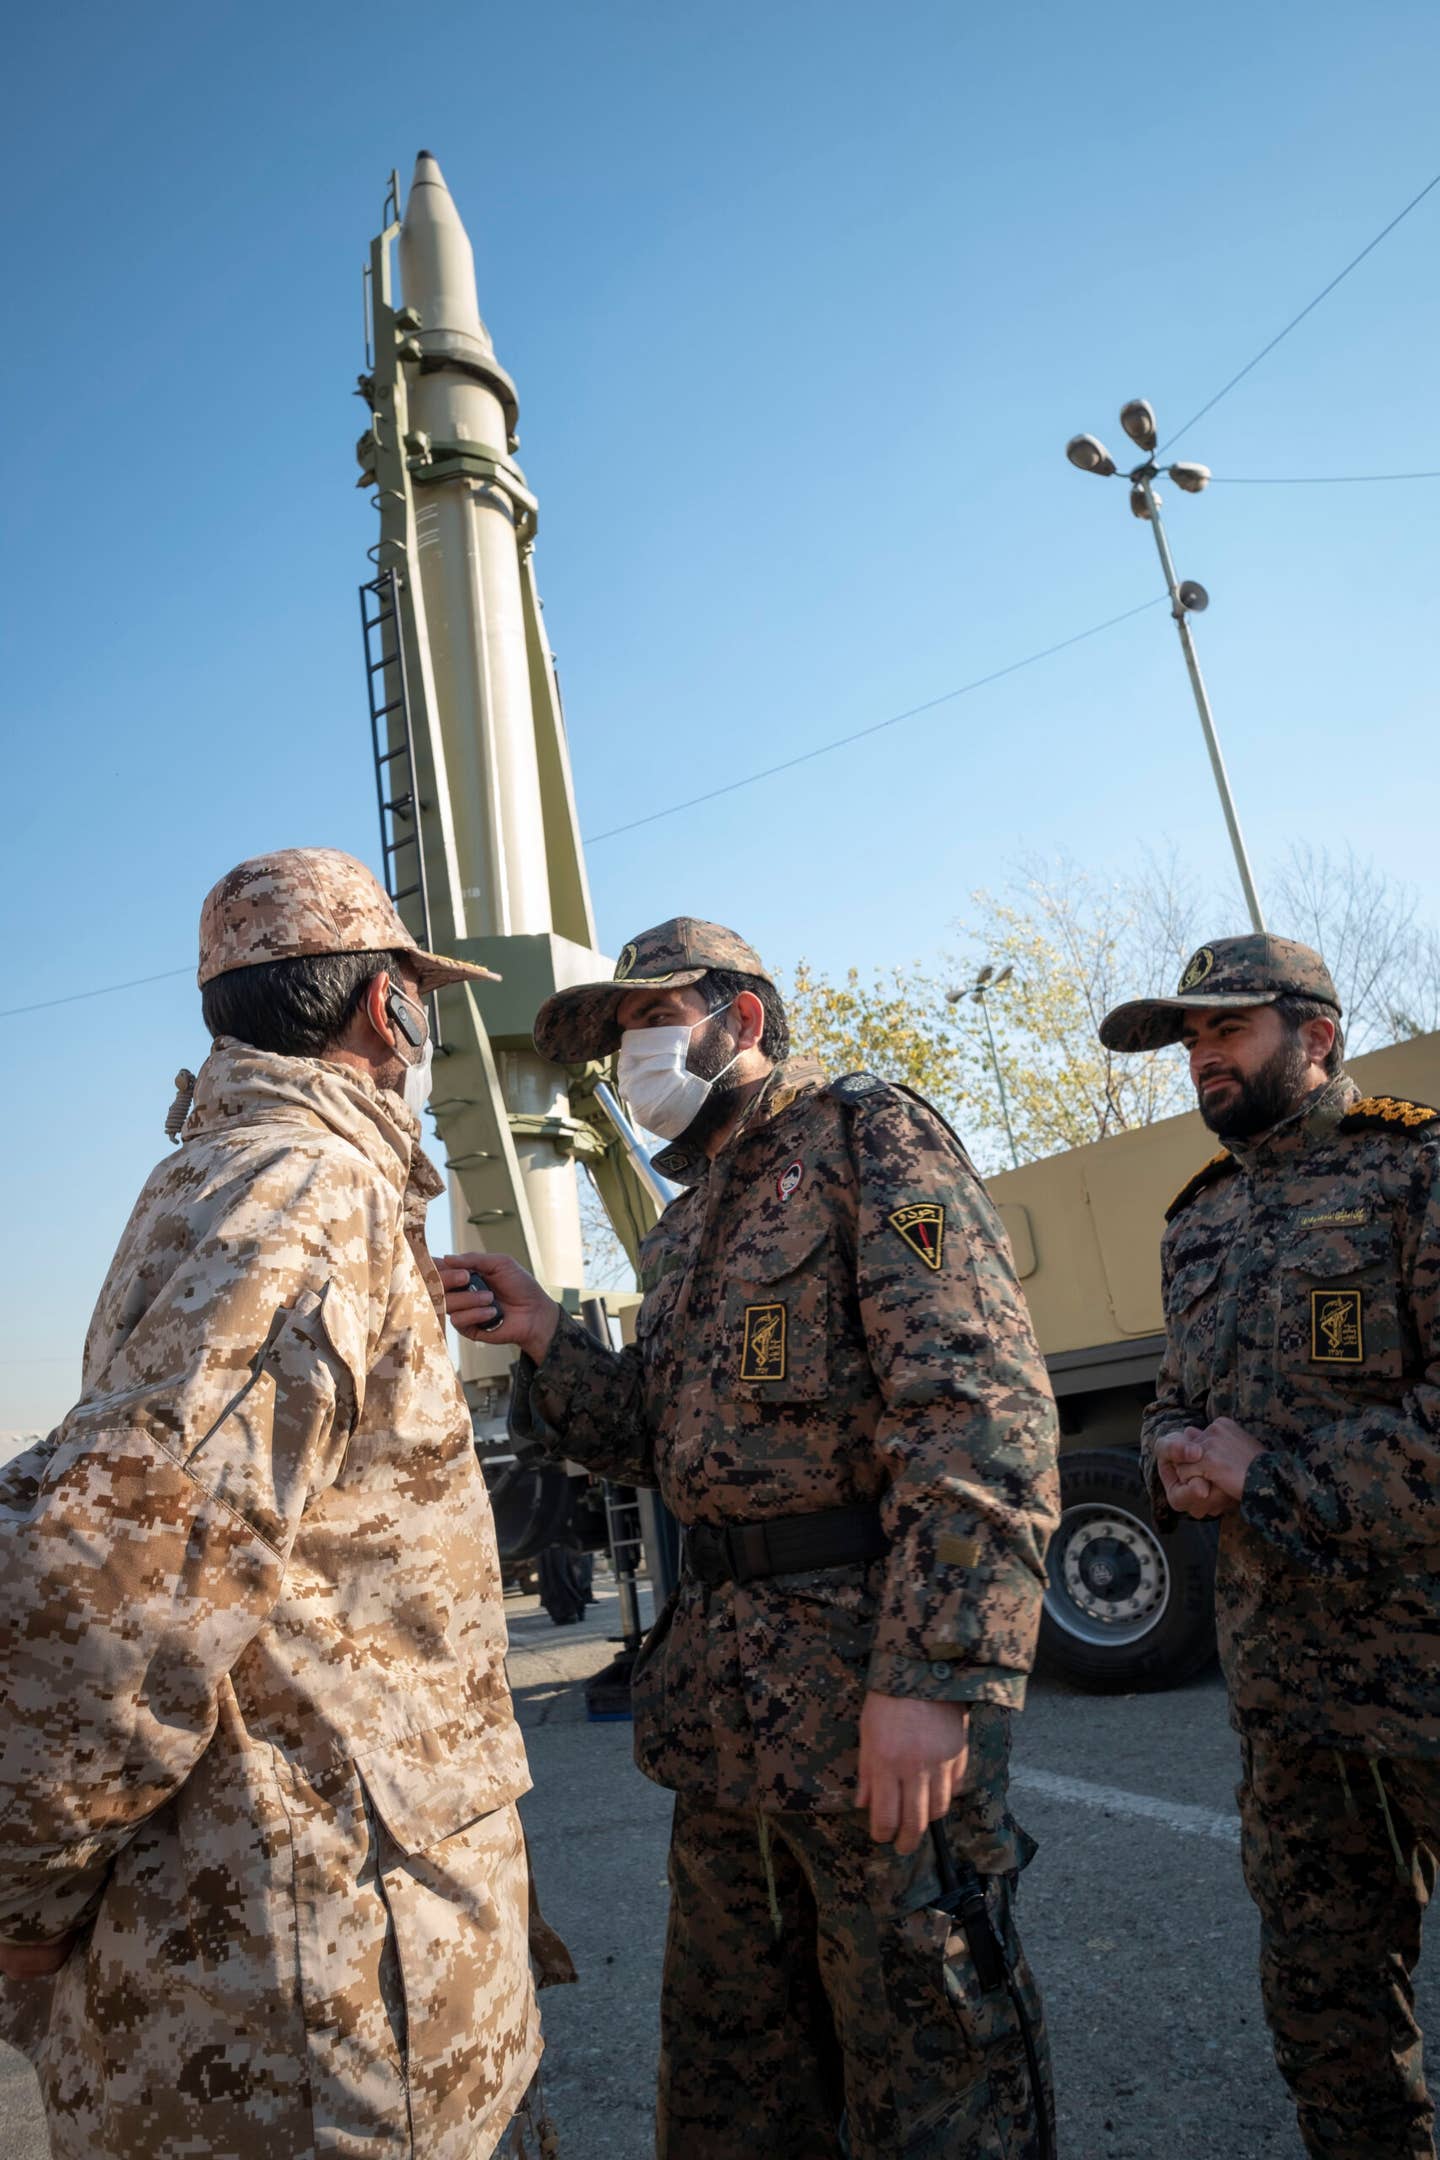 January 7, 2022, and Islamic Revolutionary Guard Corp military personnel talk as a Qiam SRBM is displayed in a military exhibition to mark the anniversary of the Iran missile attack on Al-Assad Air Base in Iraq. <em>Photo by Morteza Nikoubazl/NurPhoto via Getty Images</em>